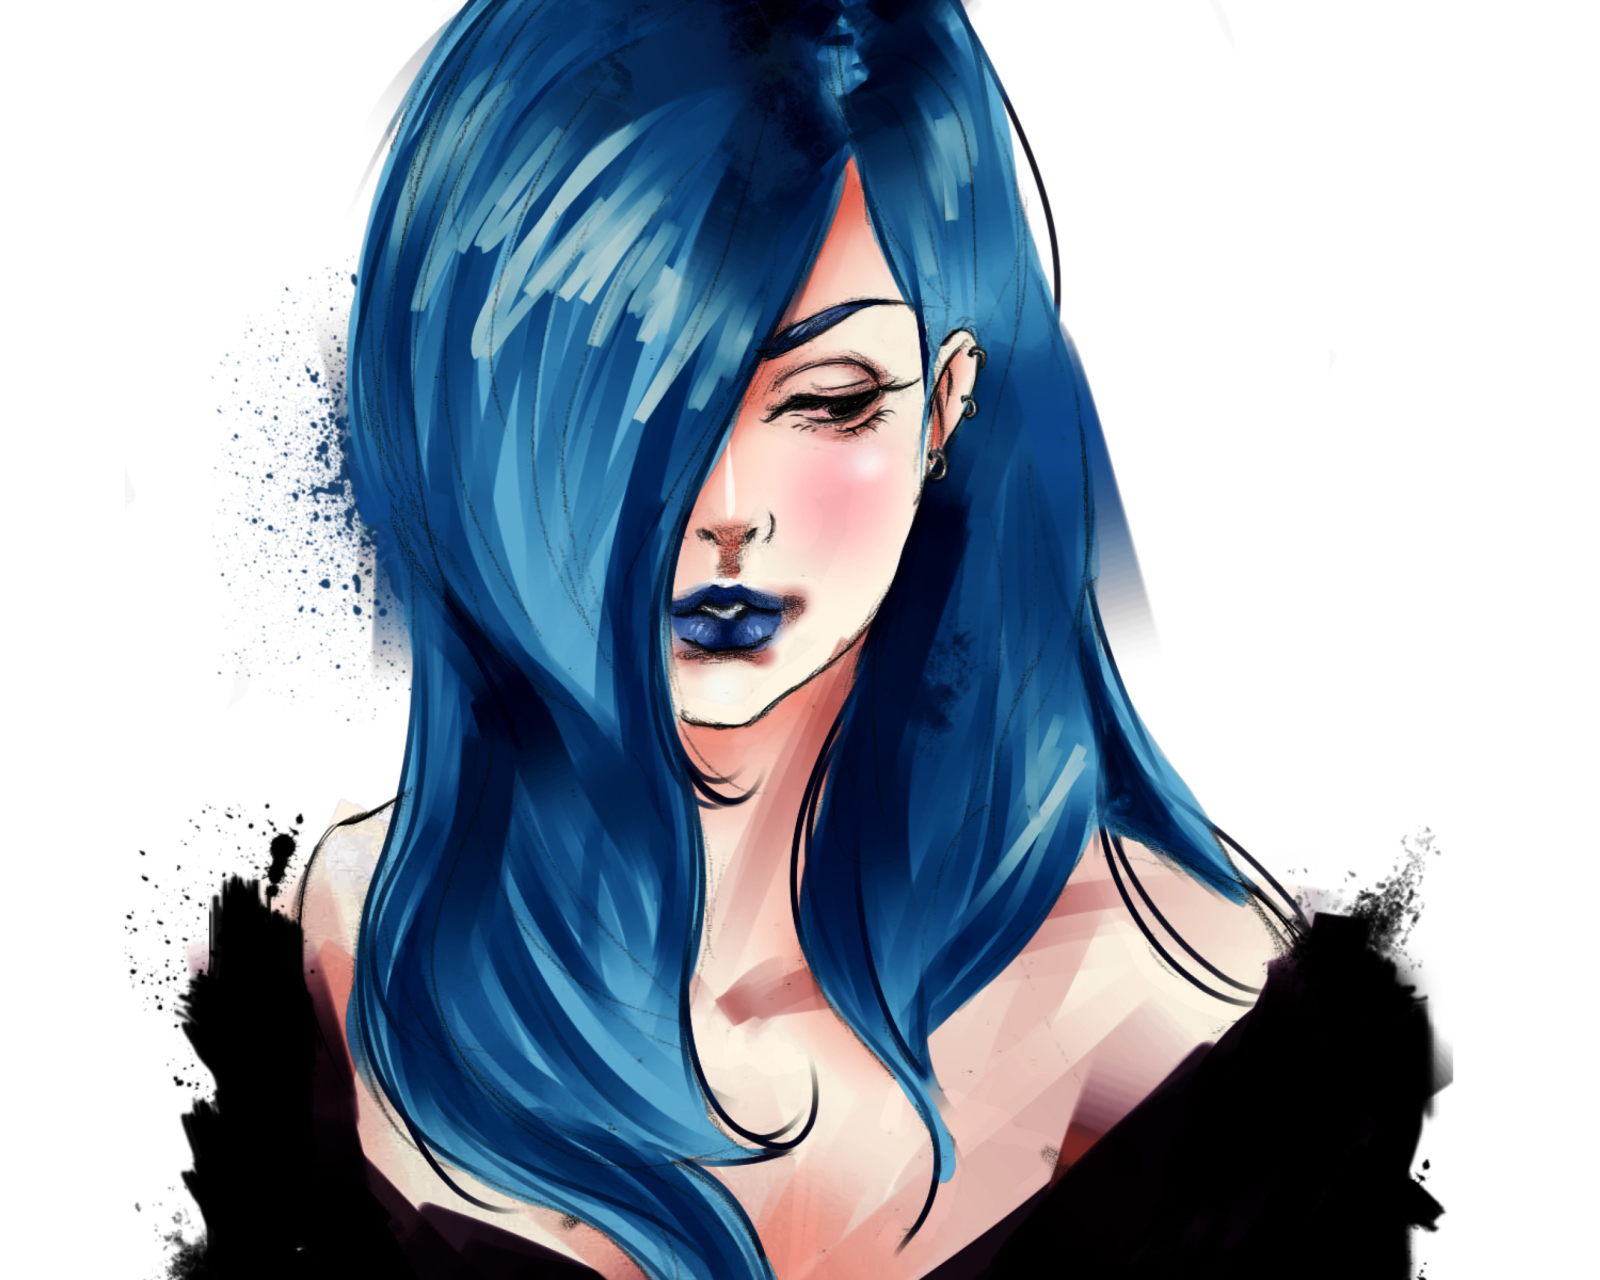 Girl With Blue Hair Painting wallpaper 1600x1280